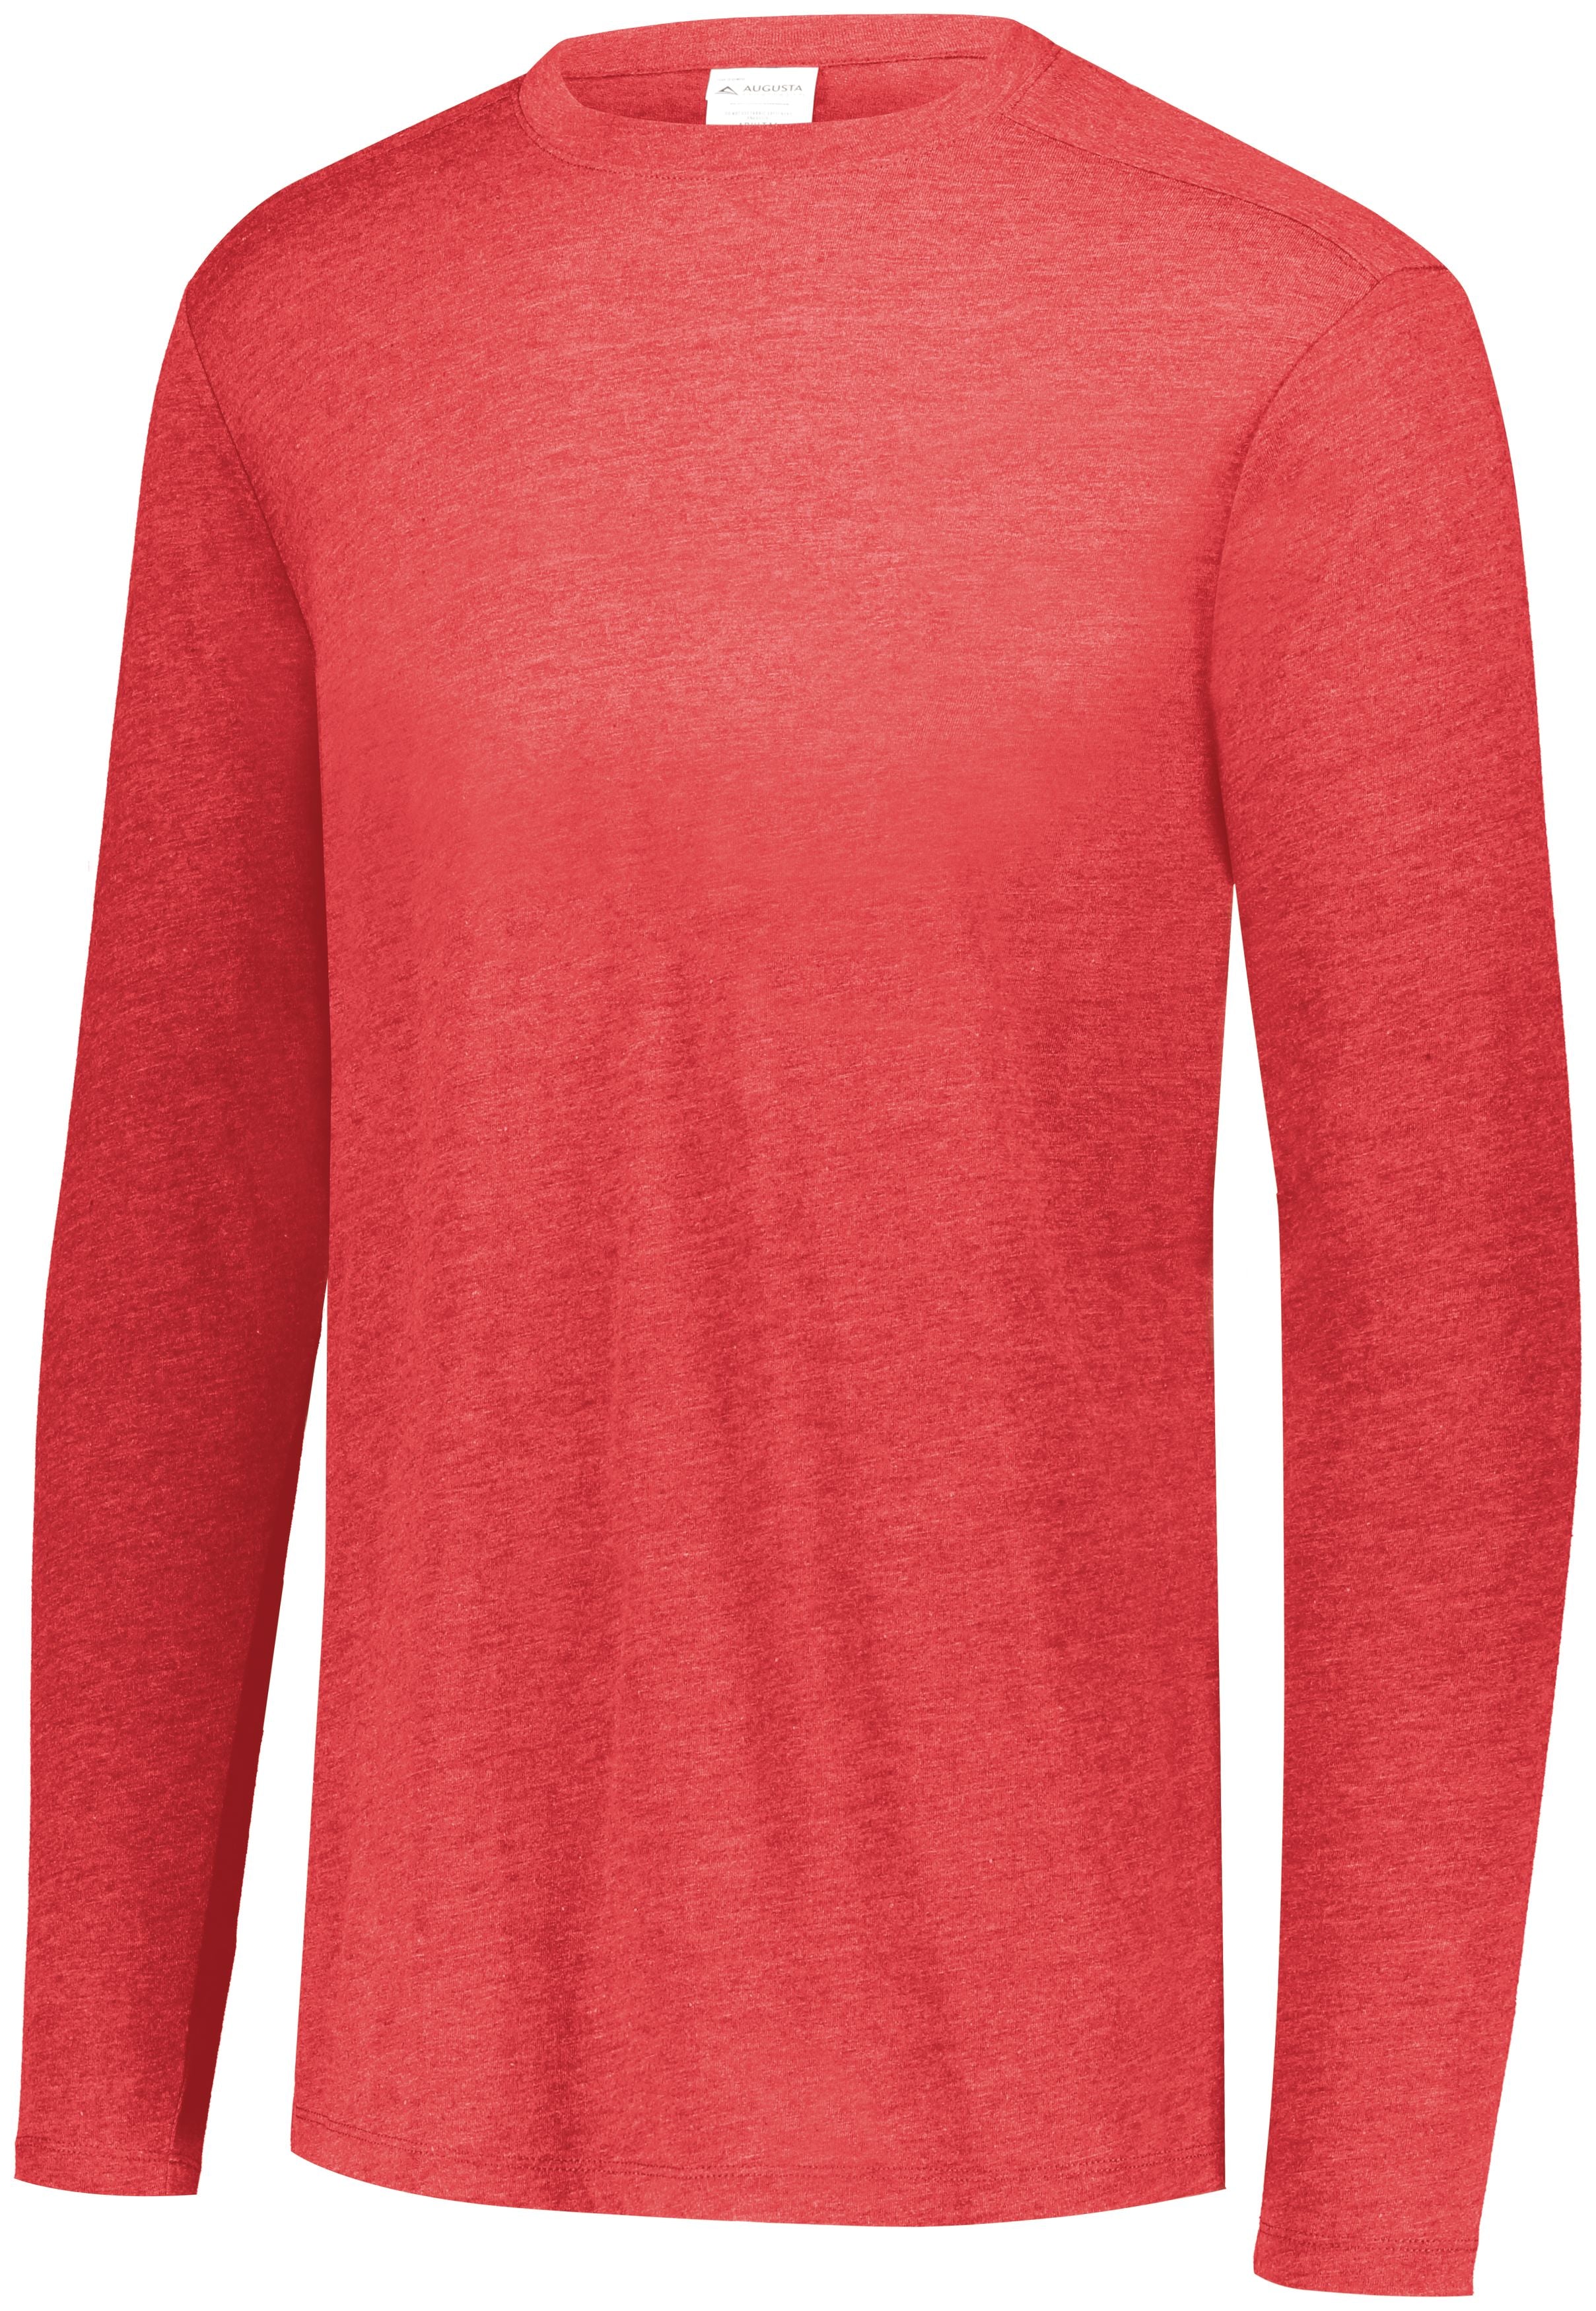 Augusta Sportswear Tri-Blend Long Sleeve Crew in Red Heather  -Part of the Adult, Augusta-Products, Shirts product lines at KanaleyCreations.com